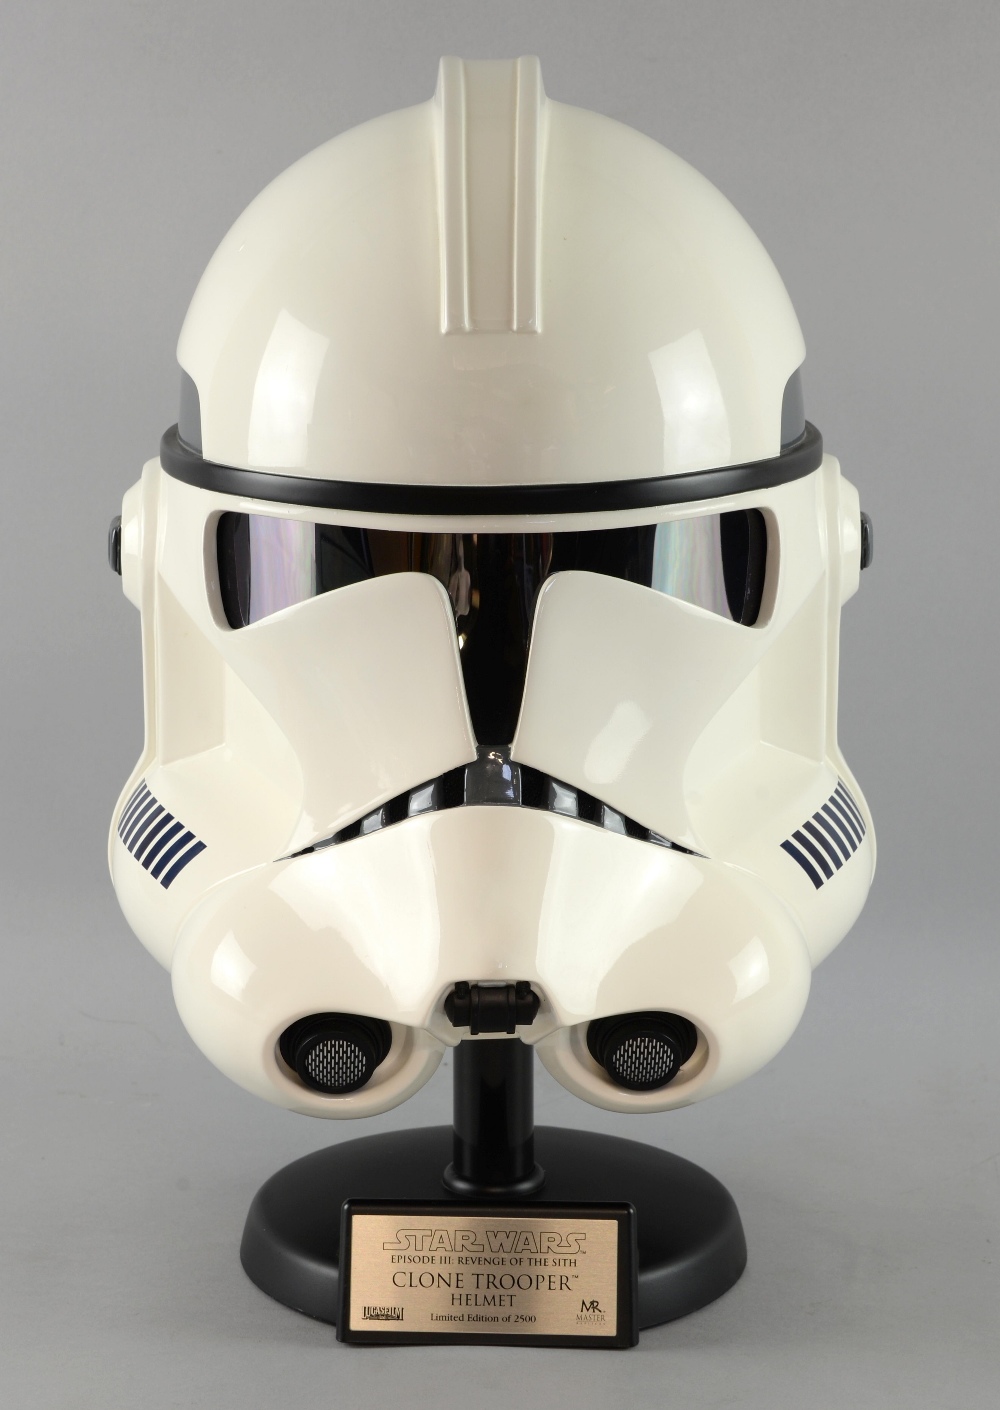 Star Wars - Master Replicas Episode III; Revenge of the Sith Clone Trooper Helmet, Limited Edition - Image 4 of 6